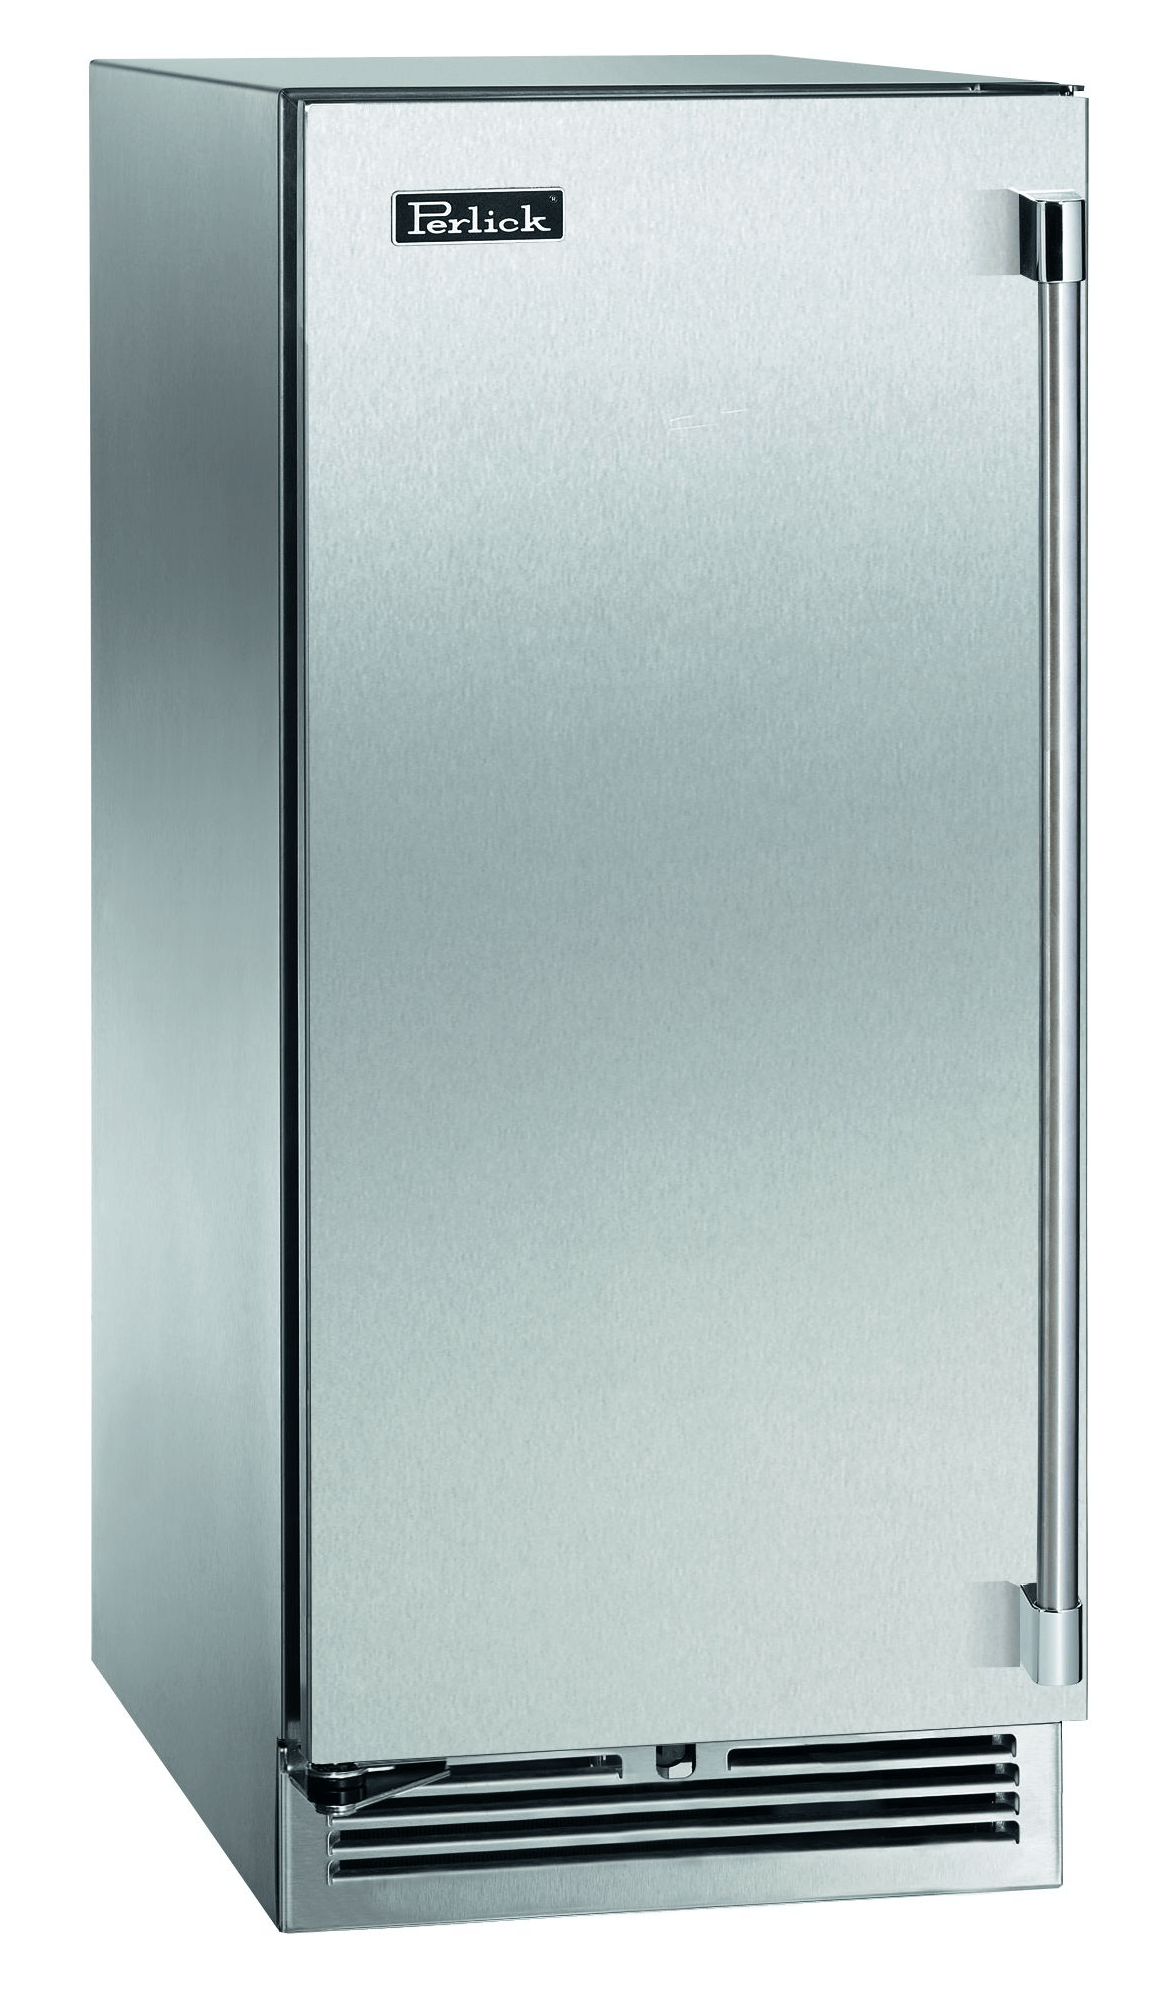 Perlick Refrigeration + Cooling Stainless Steel - Left Hinge Perlick 15” Signature Series Outdoor Refrigerator / HP15RO-4